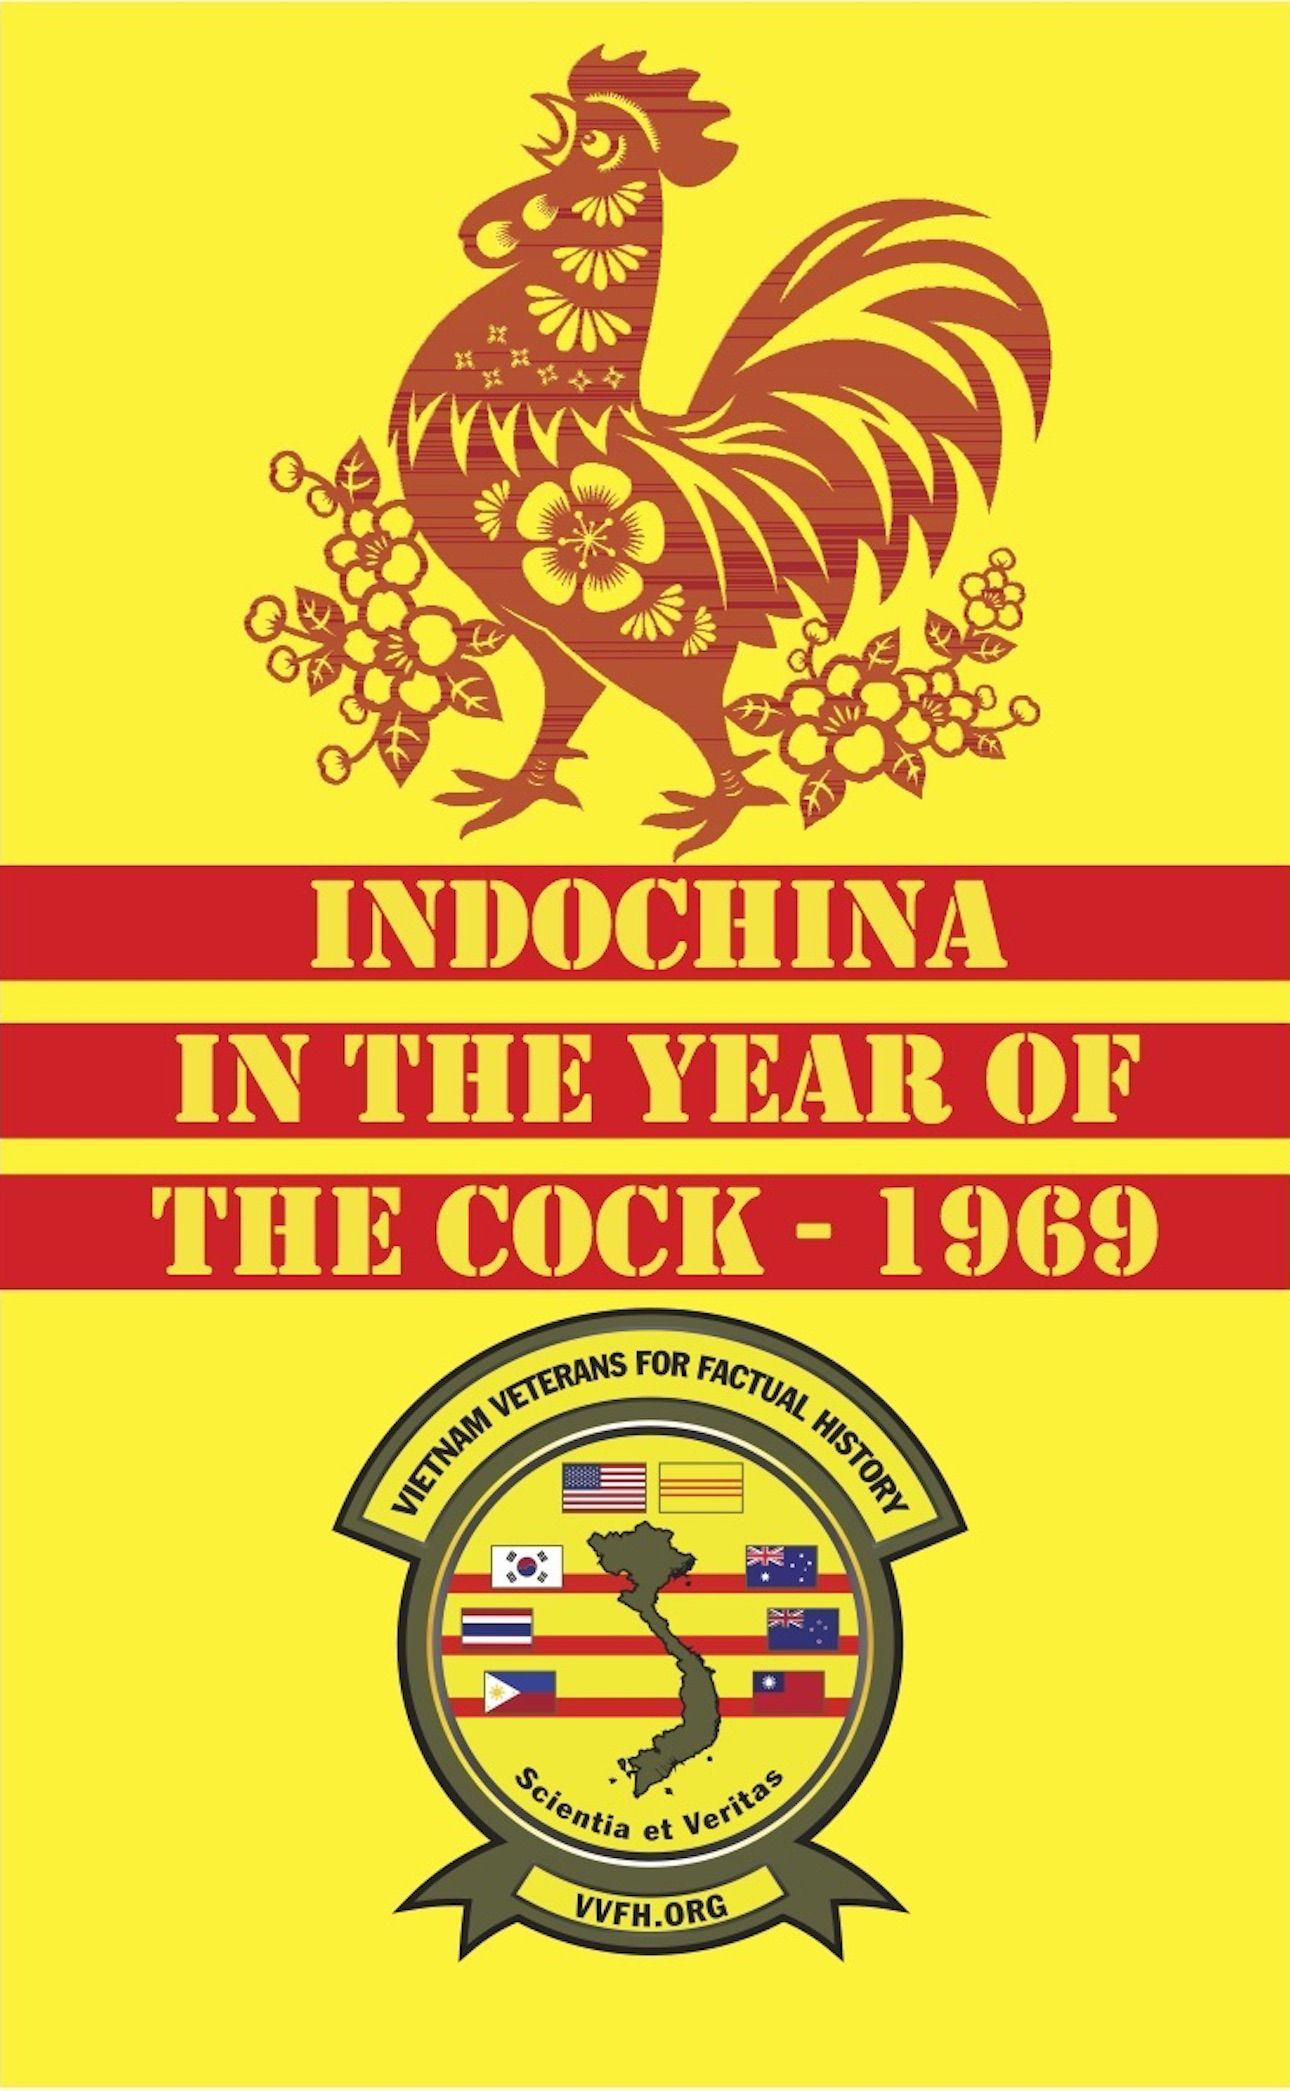 1969 Indochina in the Year of the Cock